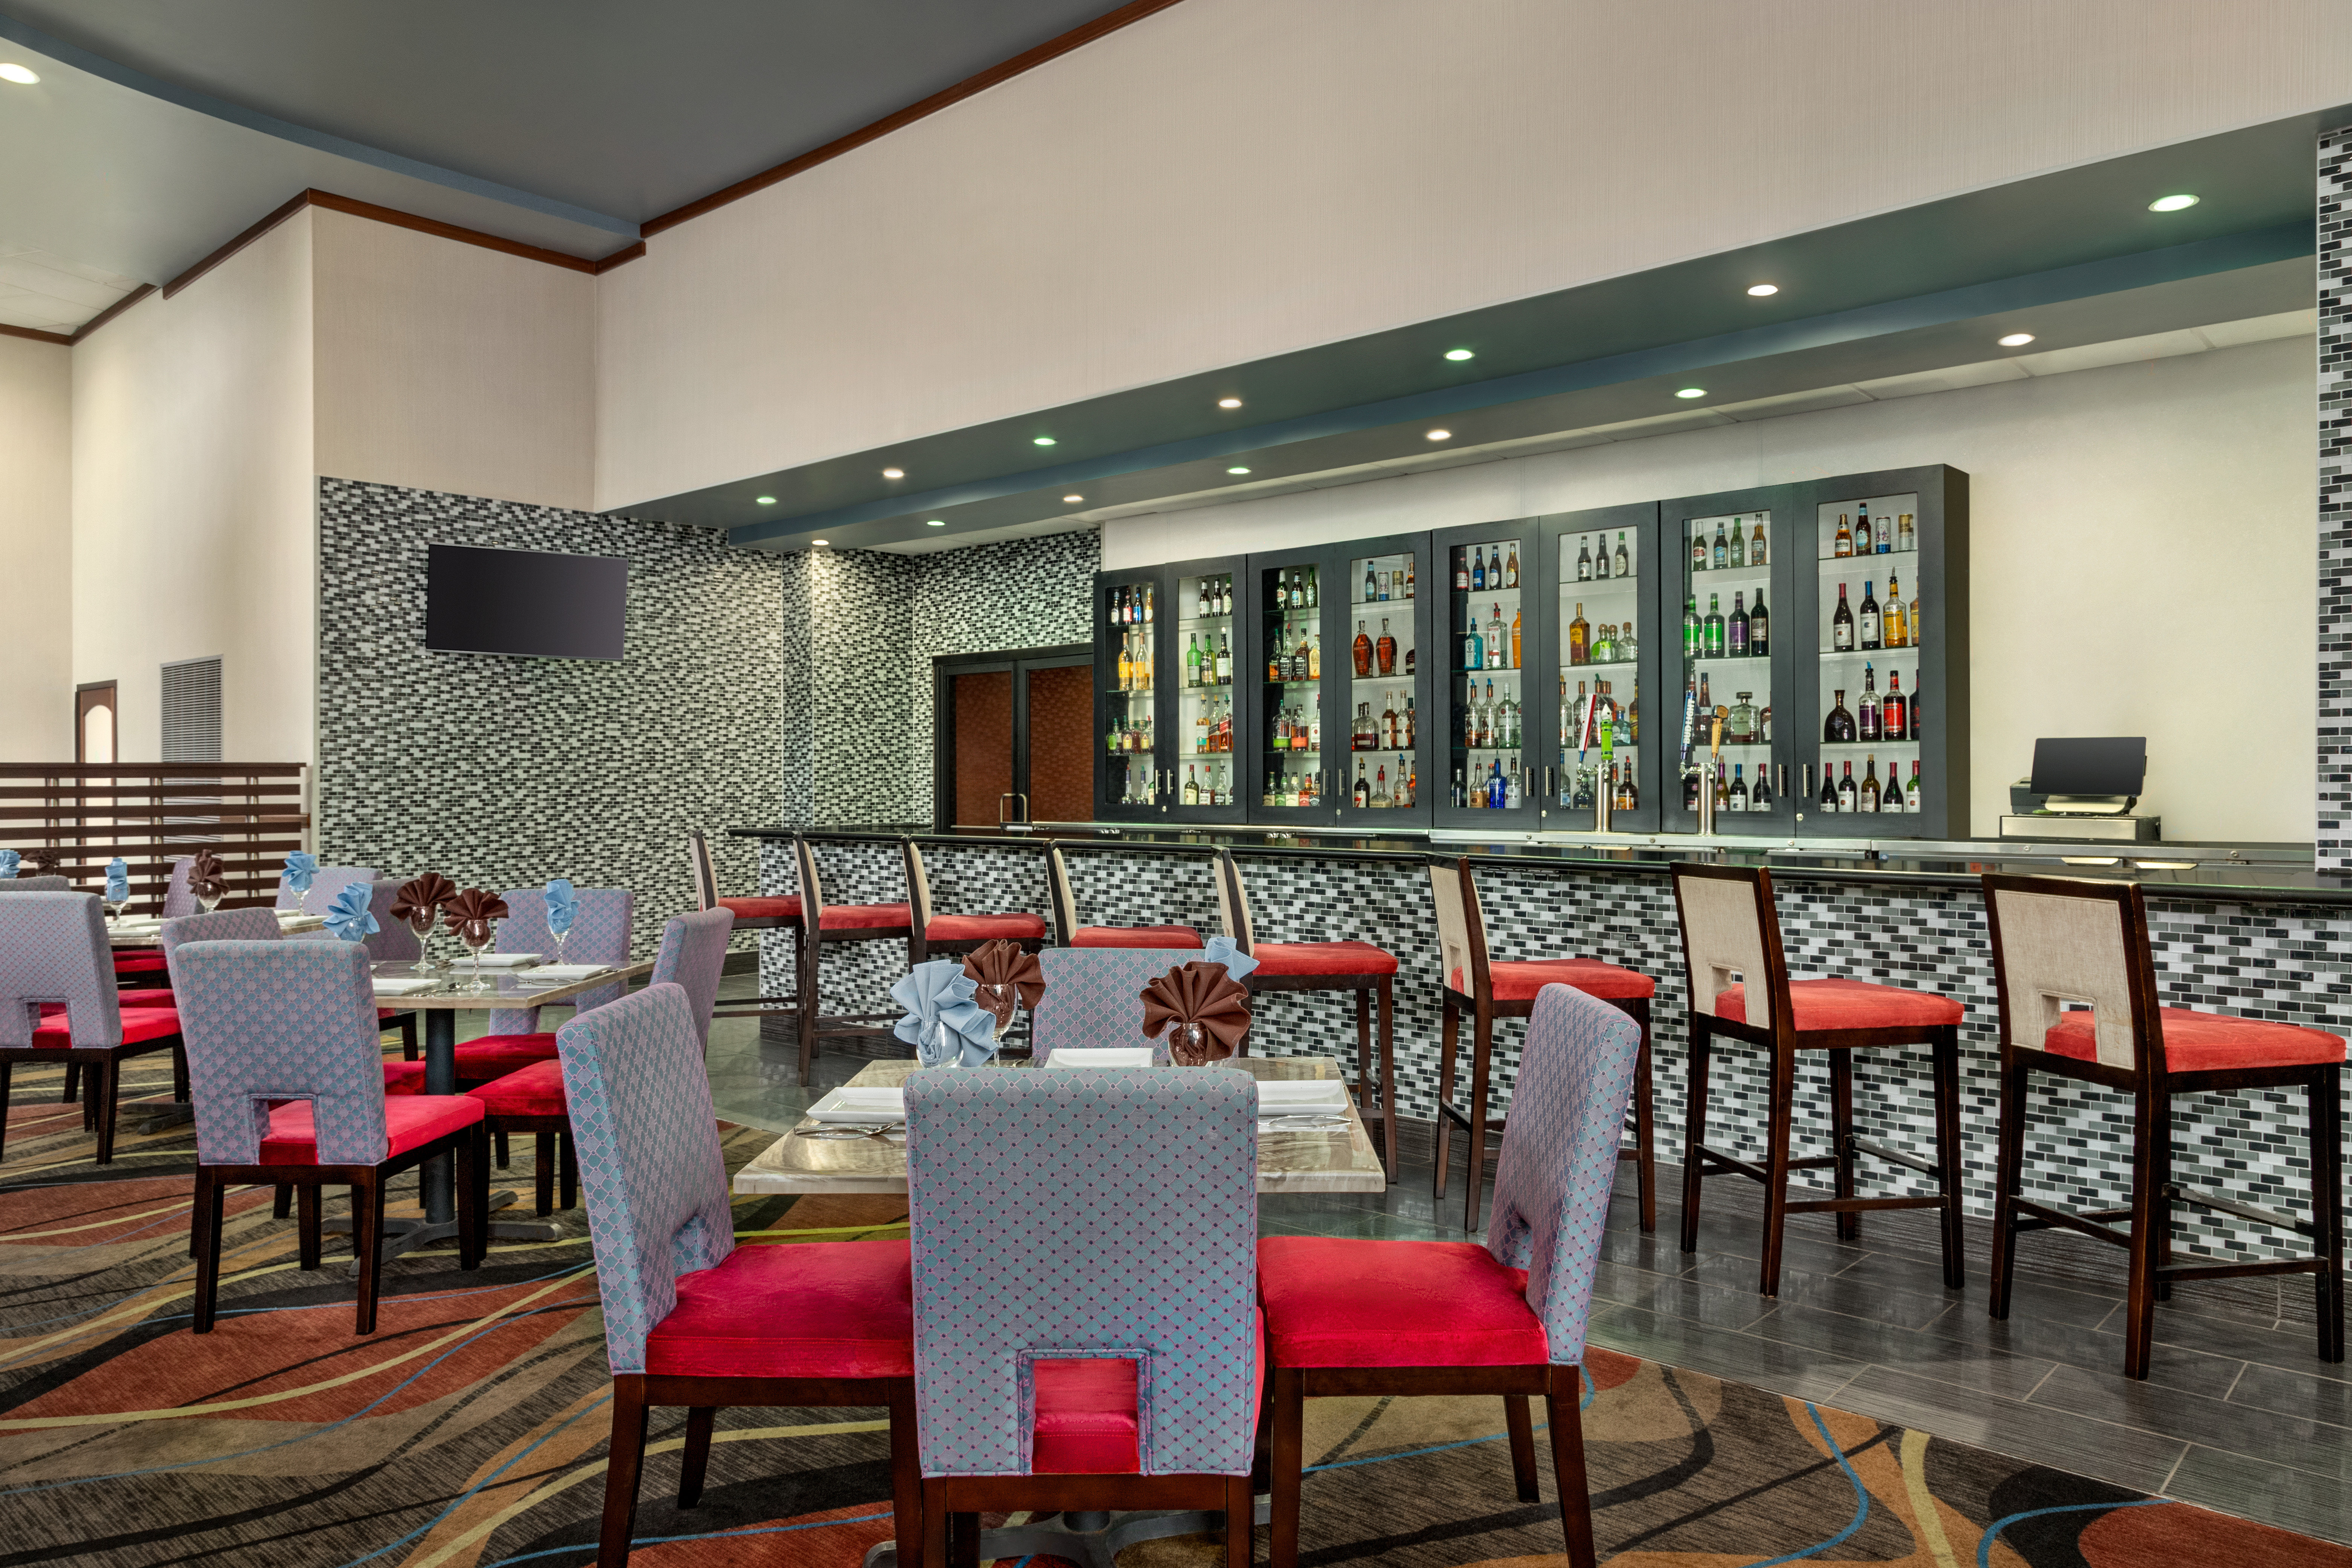 Gather with friends for beverages and appetizers at our lobby bar.